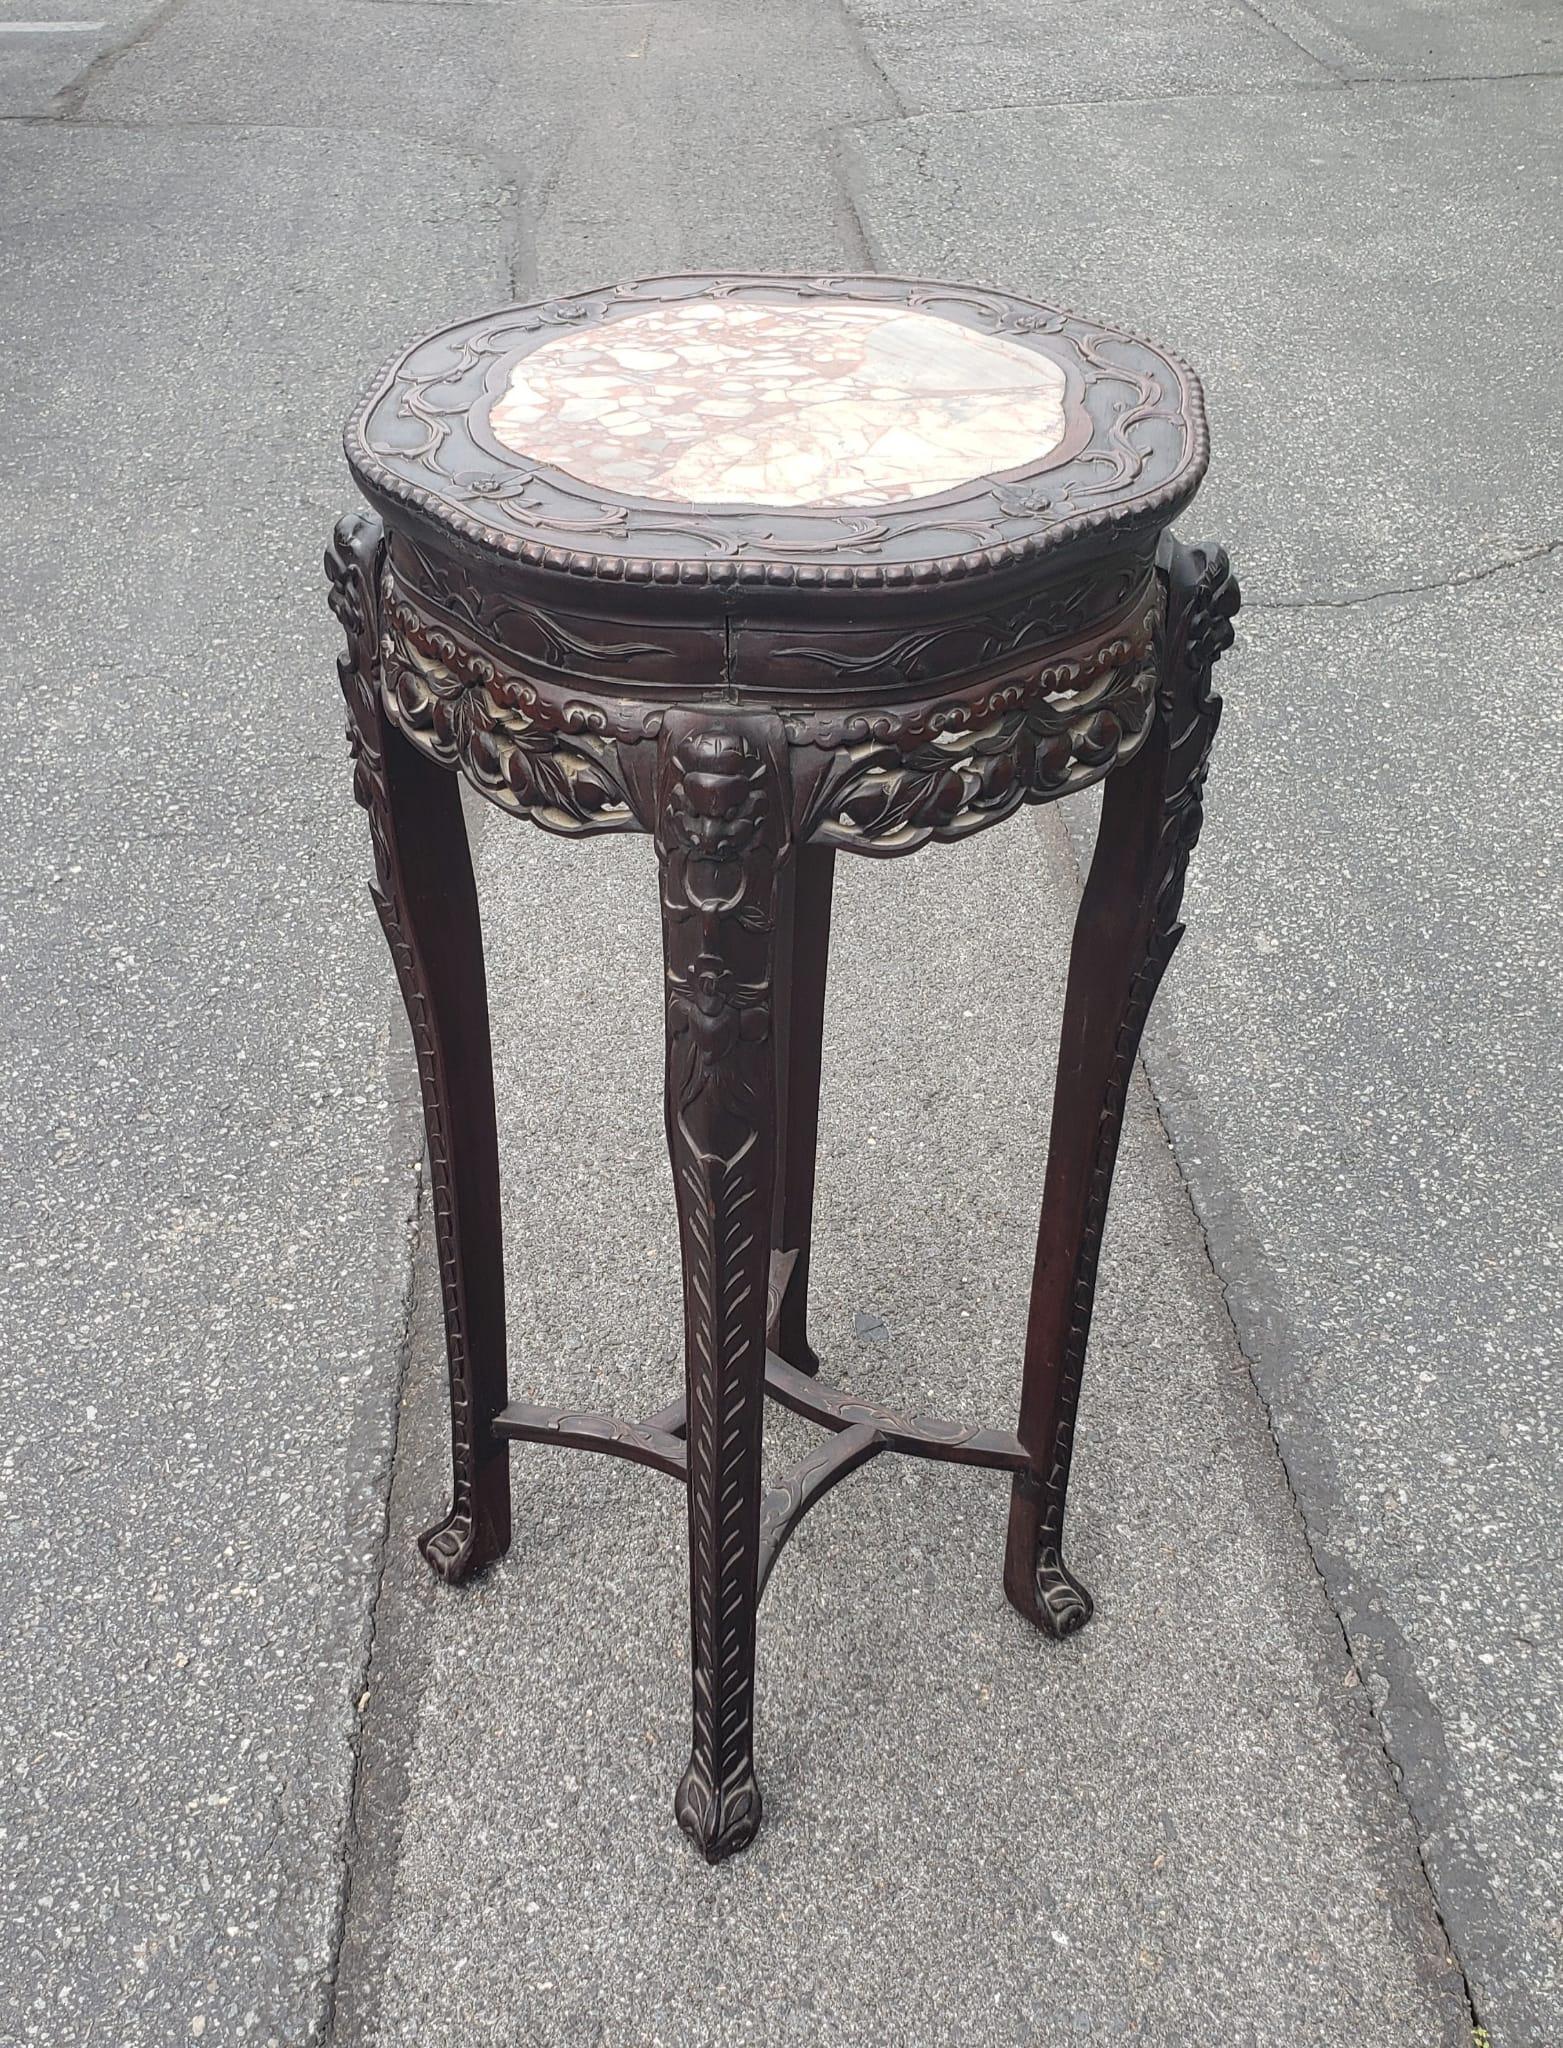 Chinese Carved Hongmu And Marble Inset Tabouret Pedestal, Circa 1900s In Good Condition For Sale In Germantown, MD